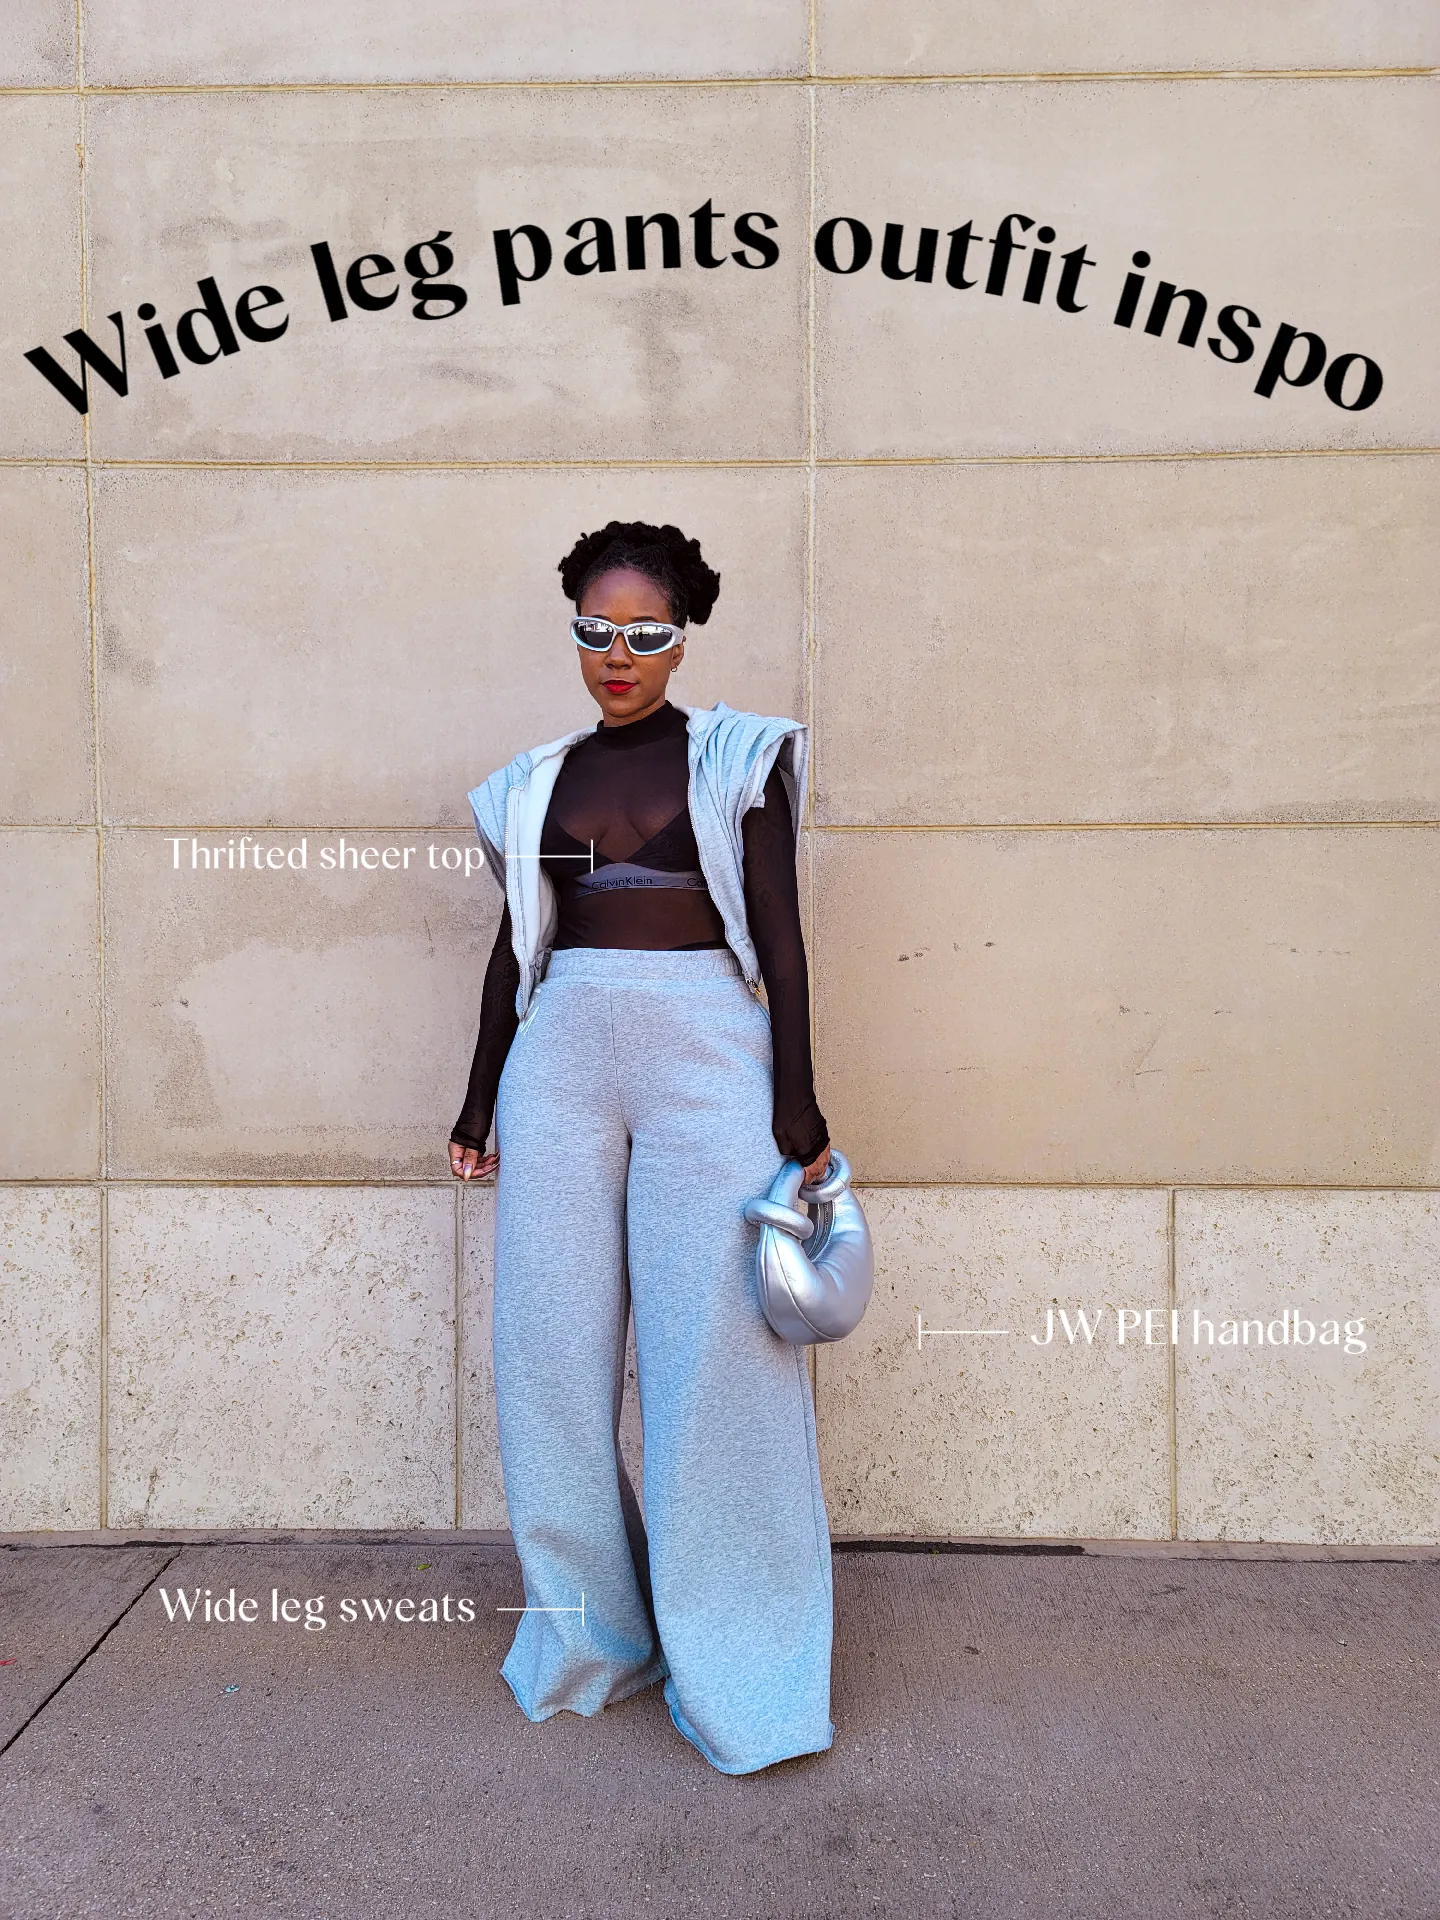 WIDE LEG JEANS HOW TO WEAR, OUTFIT IDEAS & HOW TO STYLE